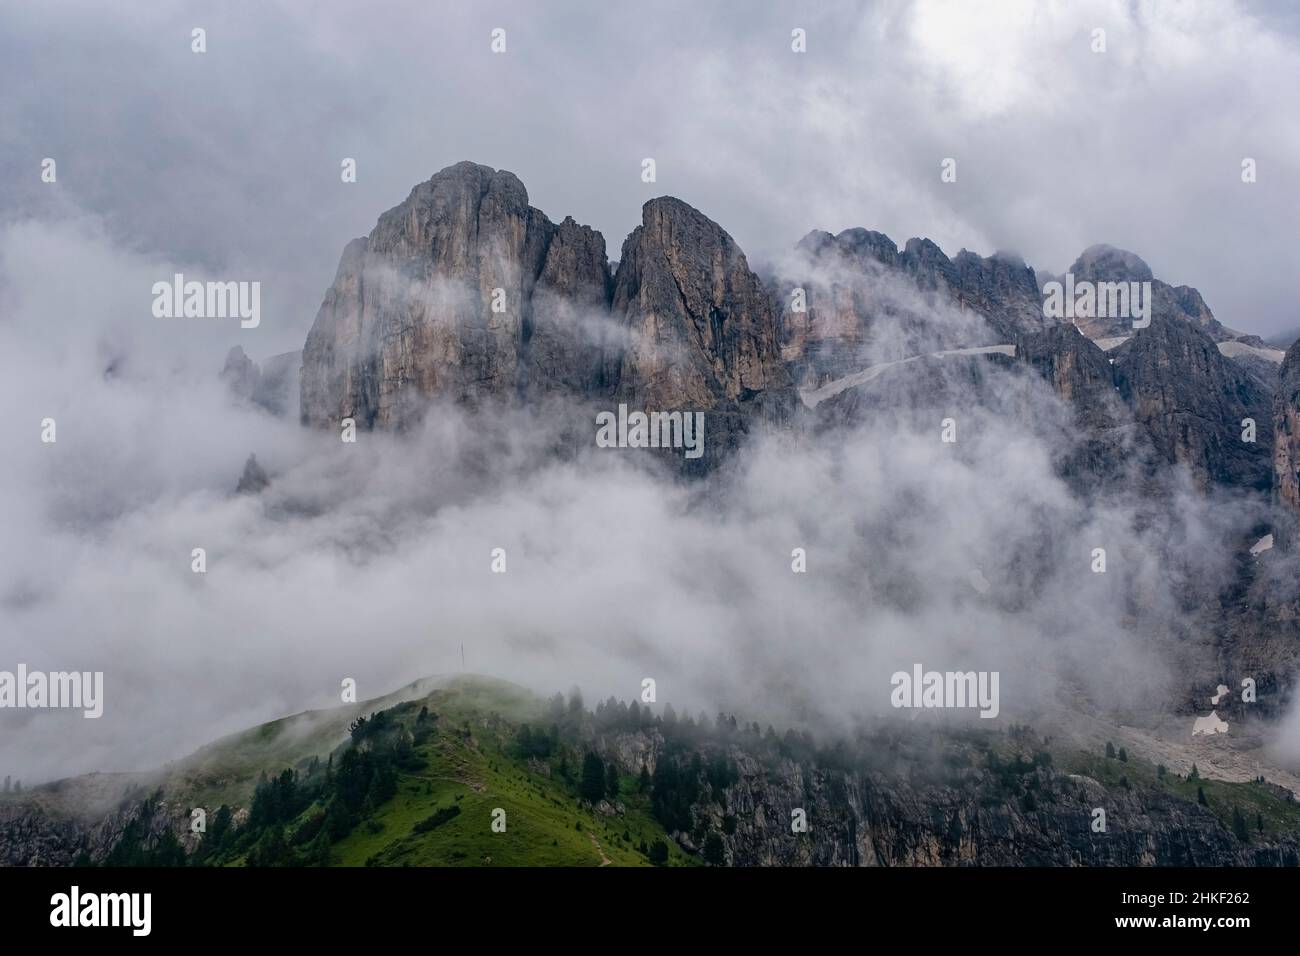 View of the Sella group with the summit of Sas dla Luesa, covered in clouds, seen from the summit of Grand Cir. Stock Photo